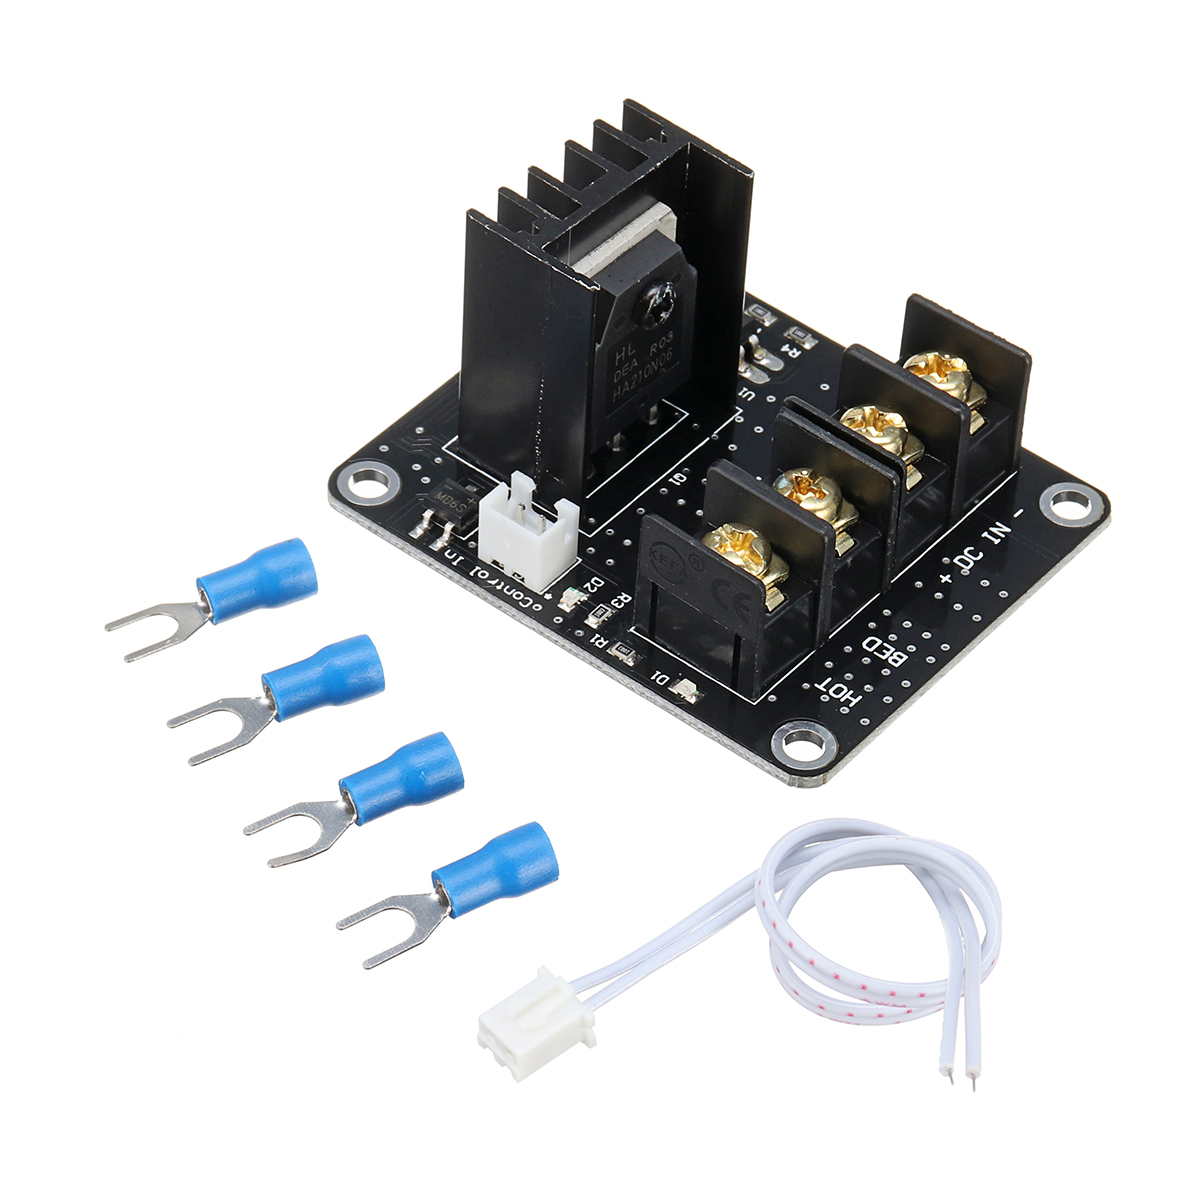 MOSFET High Power Heated Bed Expansion Power Module MOS Tube for 3D Printer Prusa i3 Anet A8/A6 13